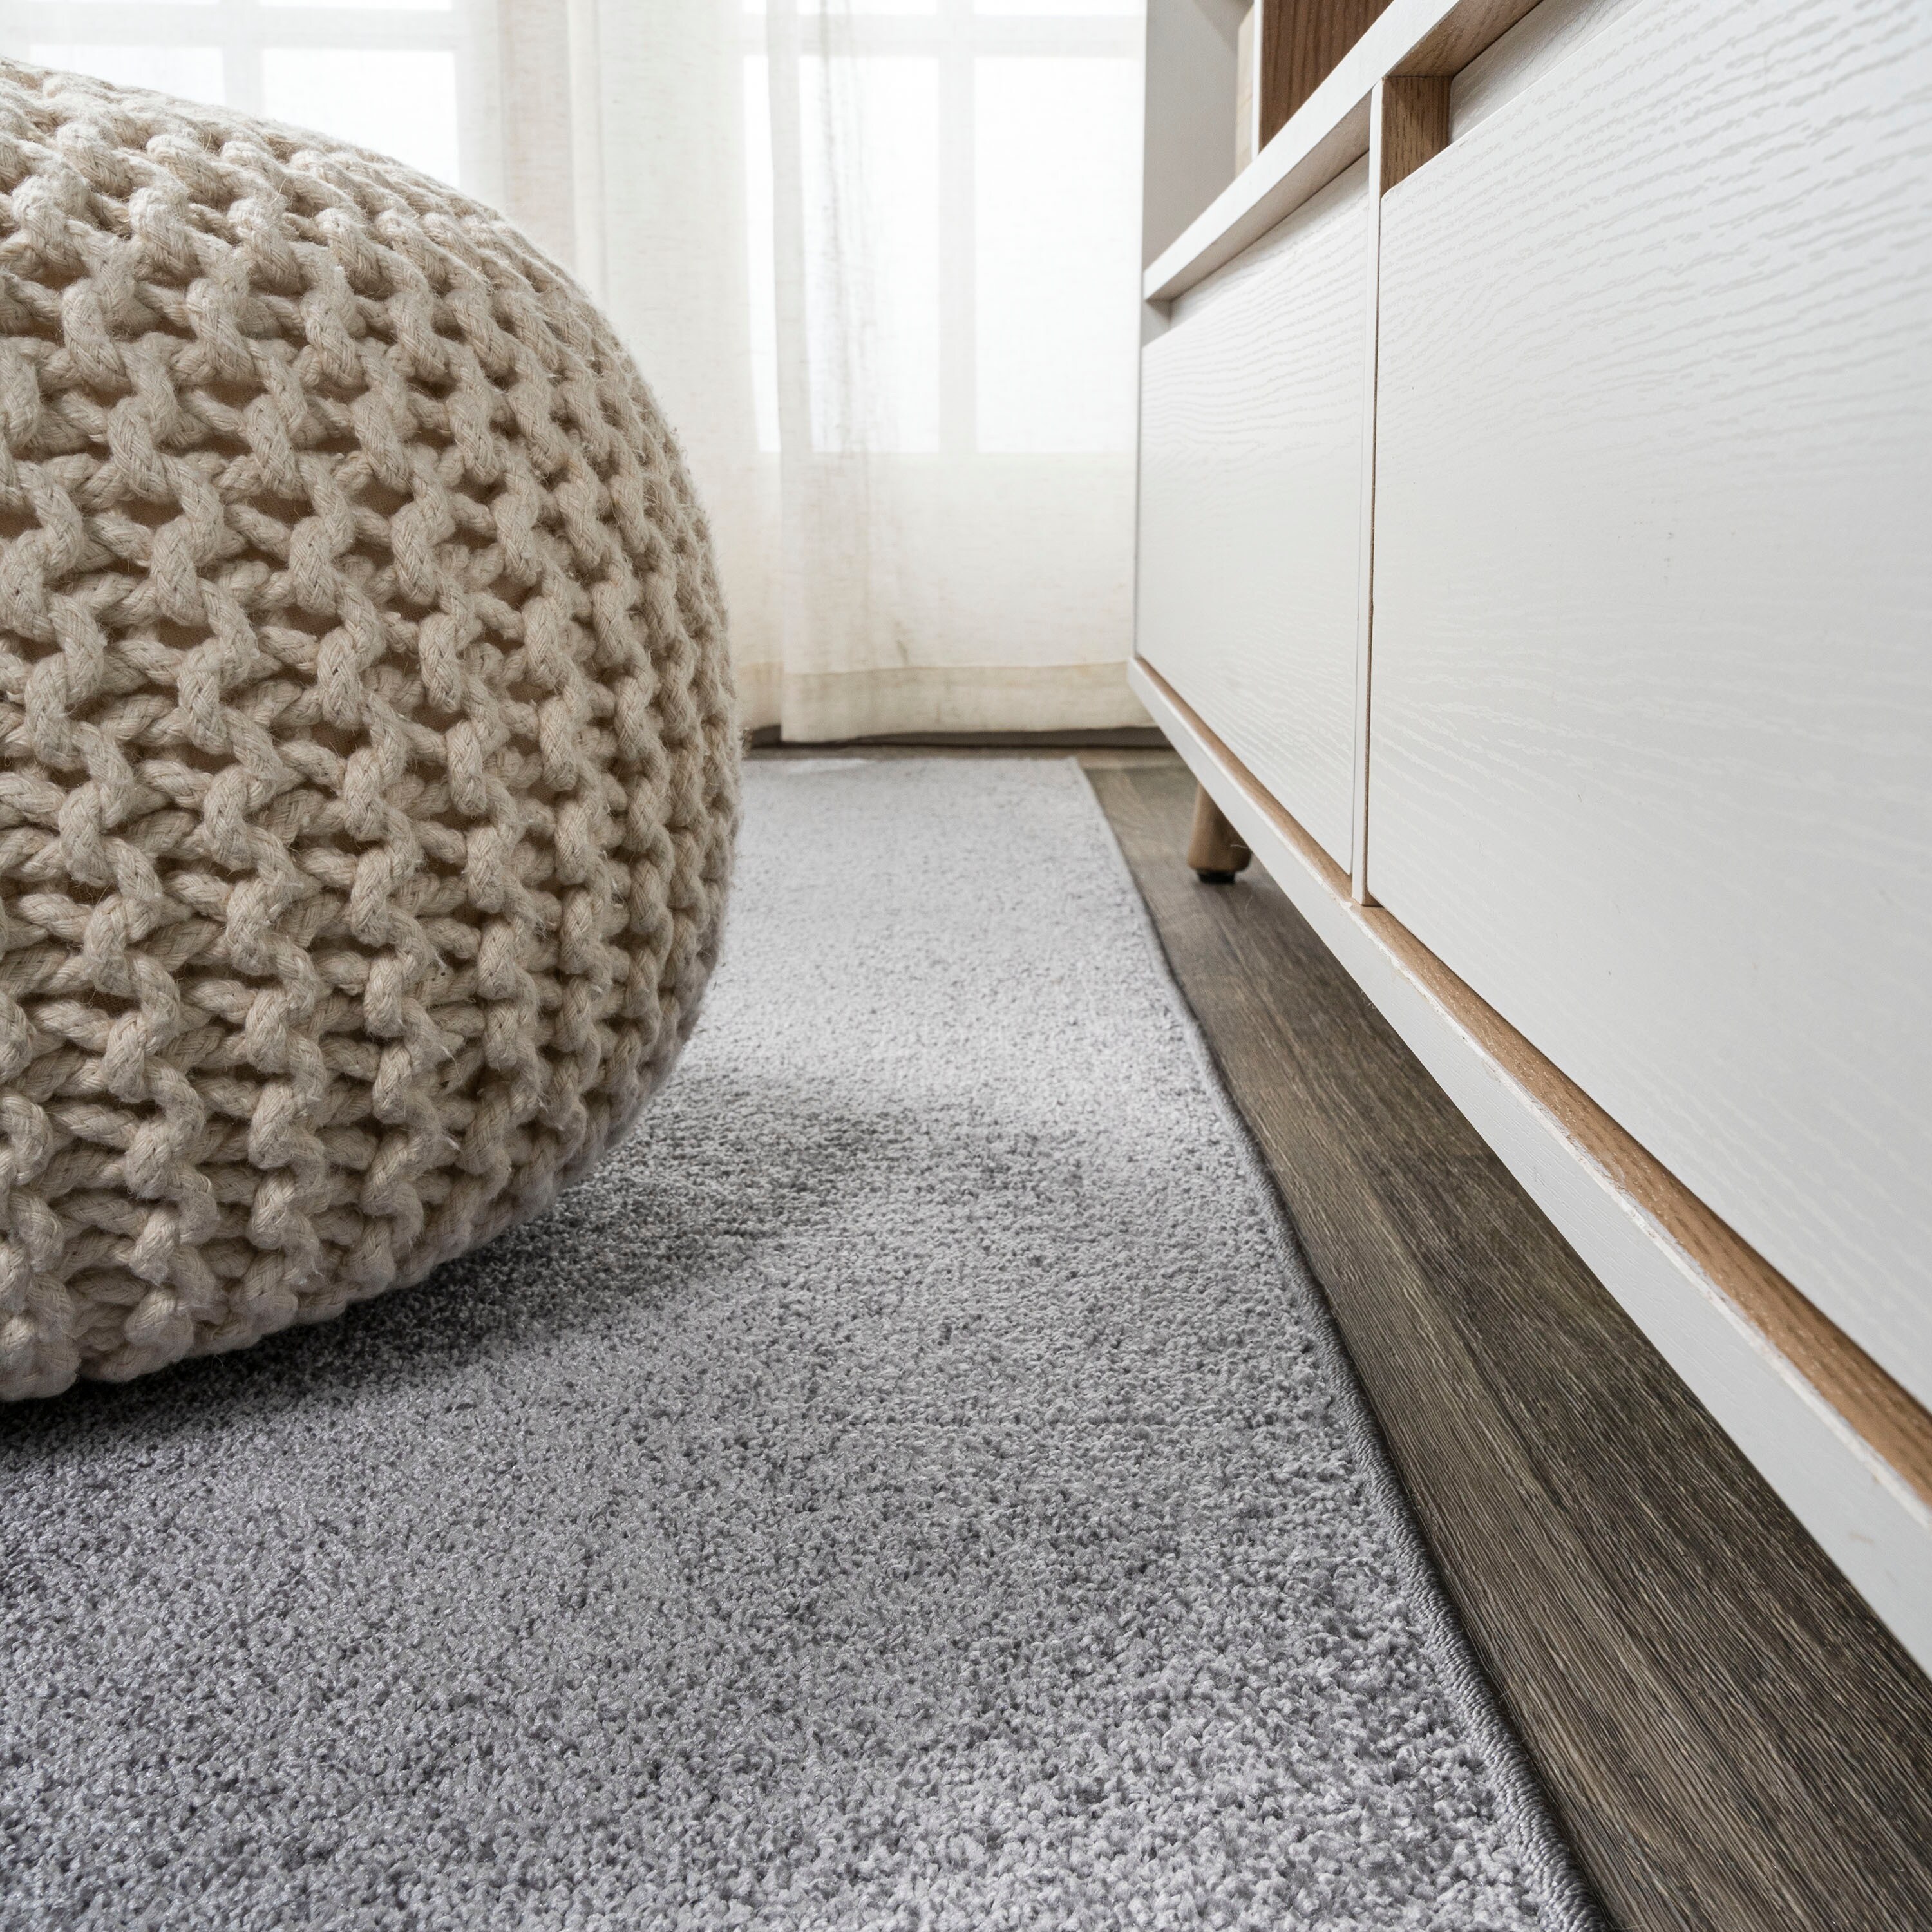 Details about   Modern Halle Runner Soft Shaggy Carpet 2in Grey Width 19 11/16-78 11/16in Long 